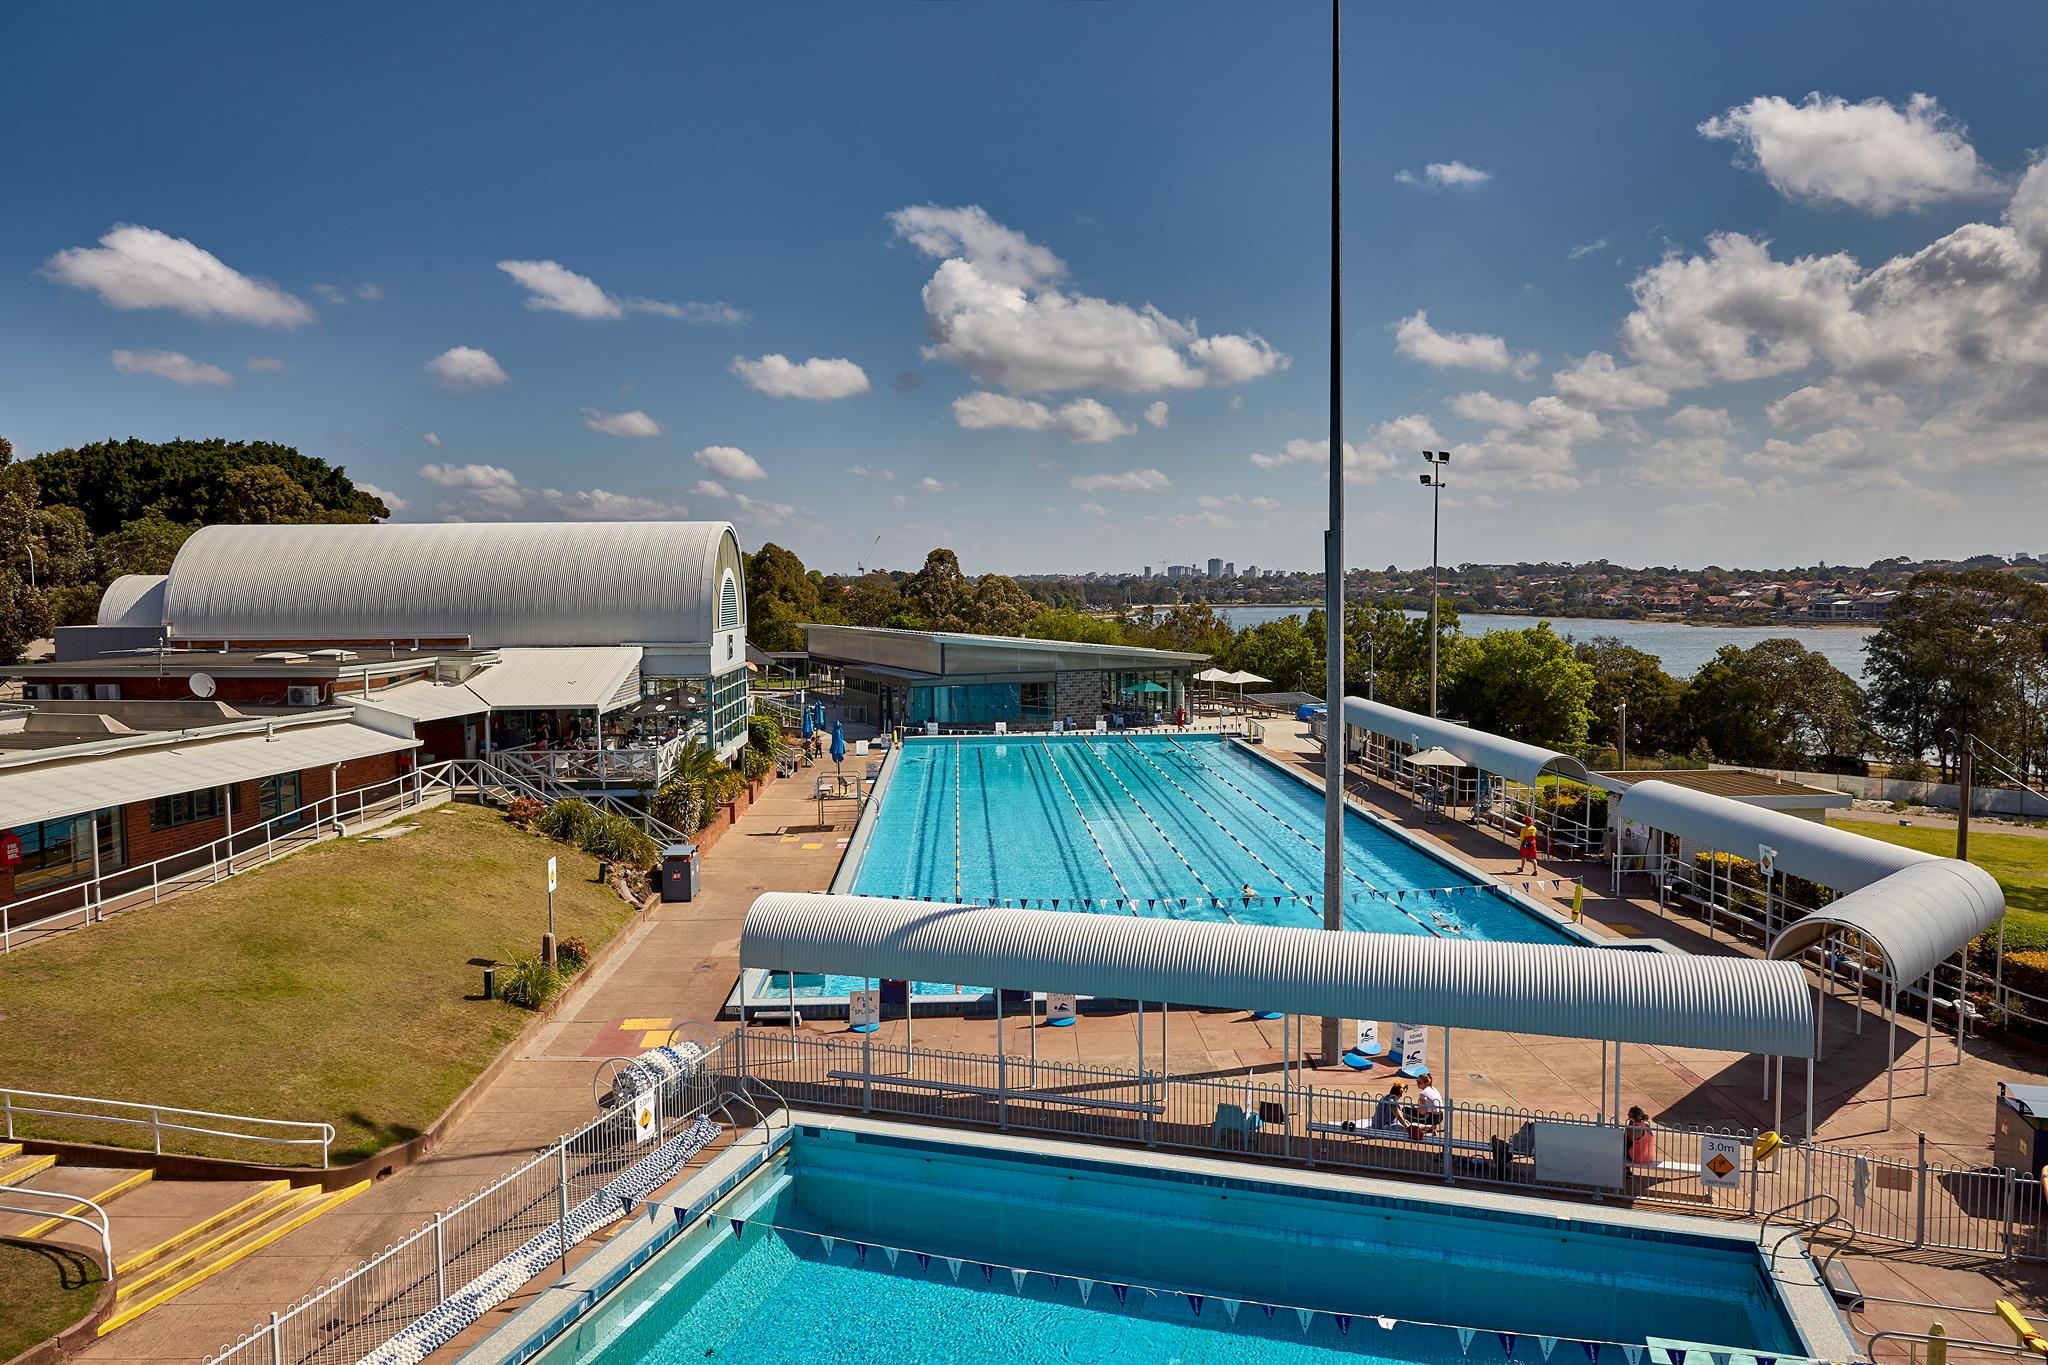 Outdoor Public Pools reopen across the Inner West and Inner City